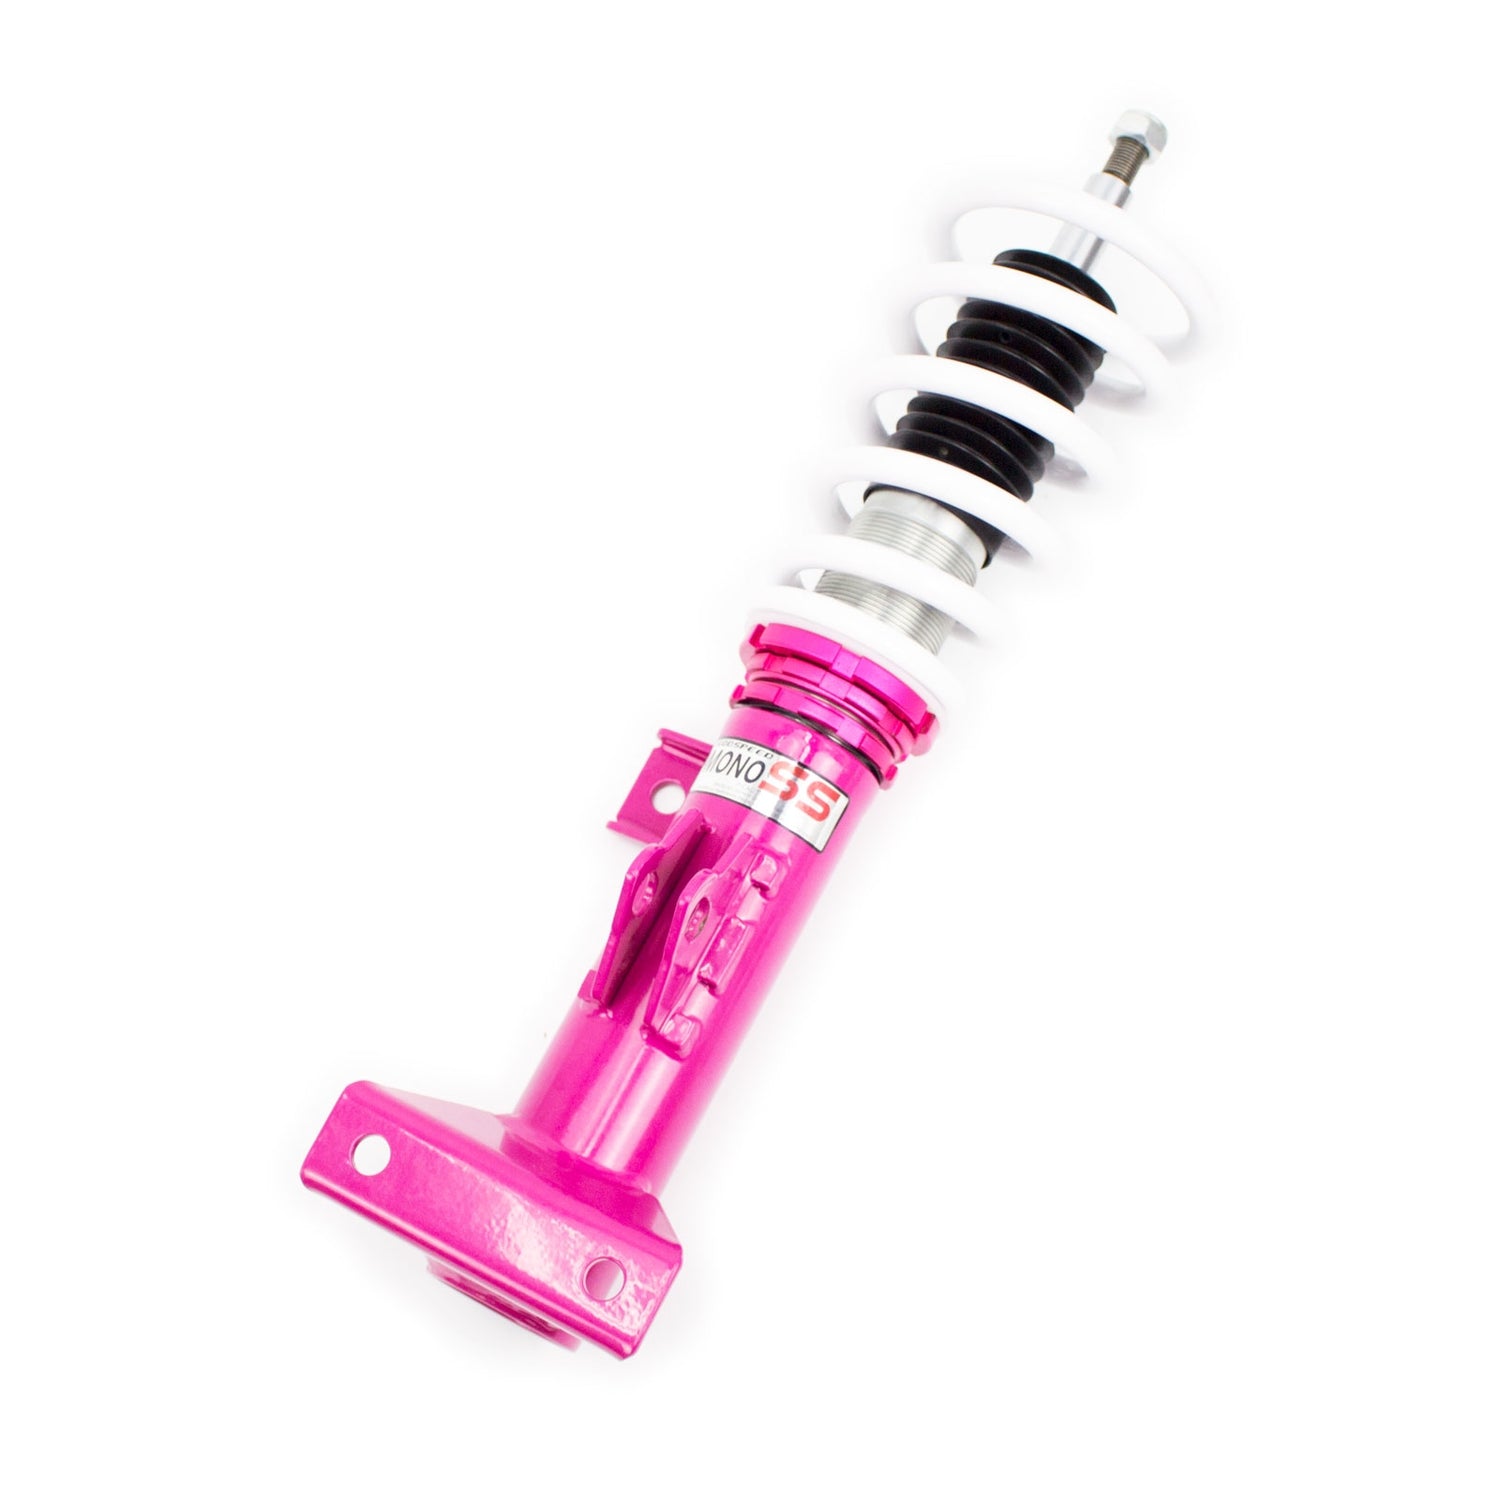 Godspeed MSS0172-B MonoSS Coilover Lowering Kit, Fully Adjustable, Ride Height, Spring Tension And 16 Click Damping, Mercedes-Benz E-Class Coupe(C207)/Convertible(A207) 10-15